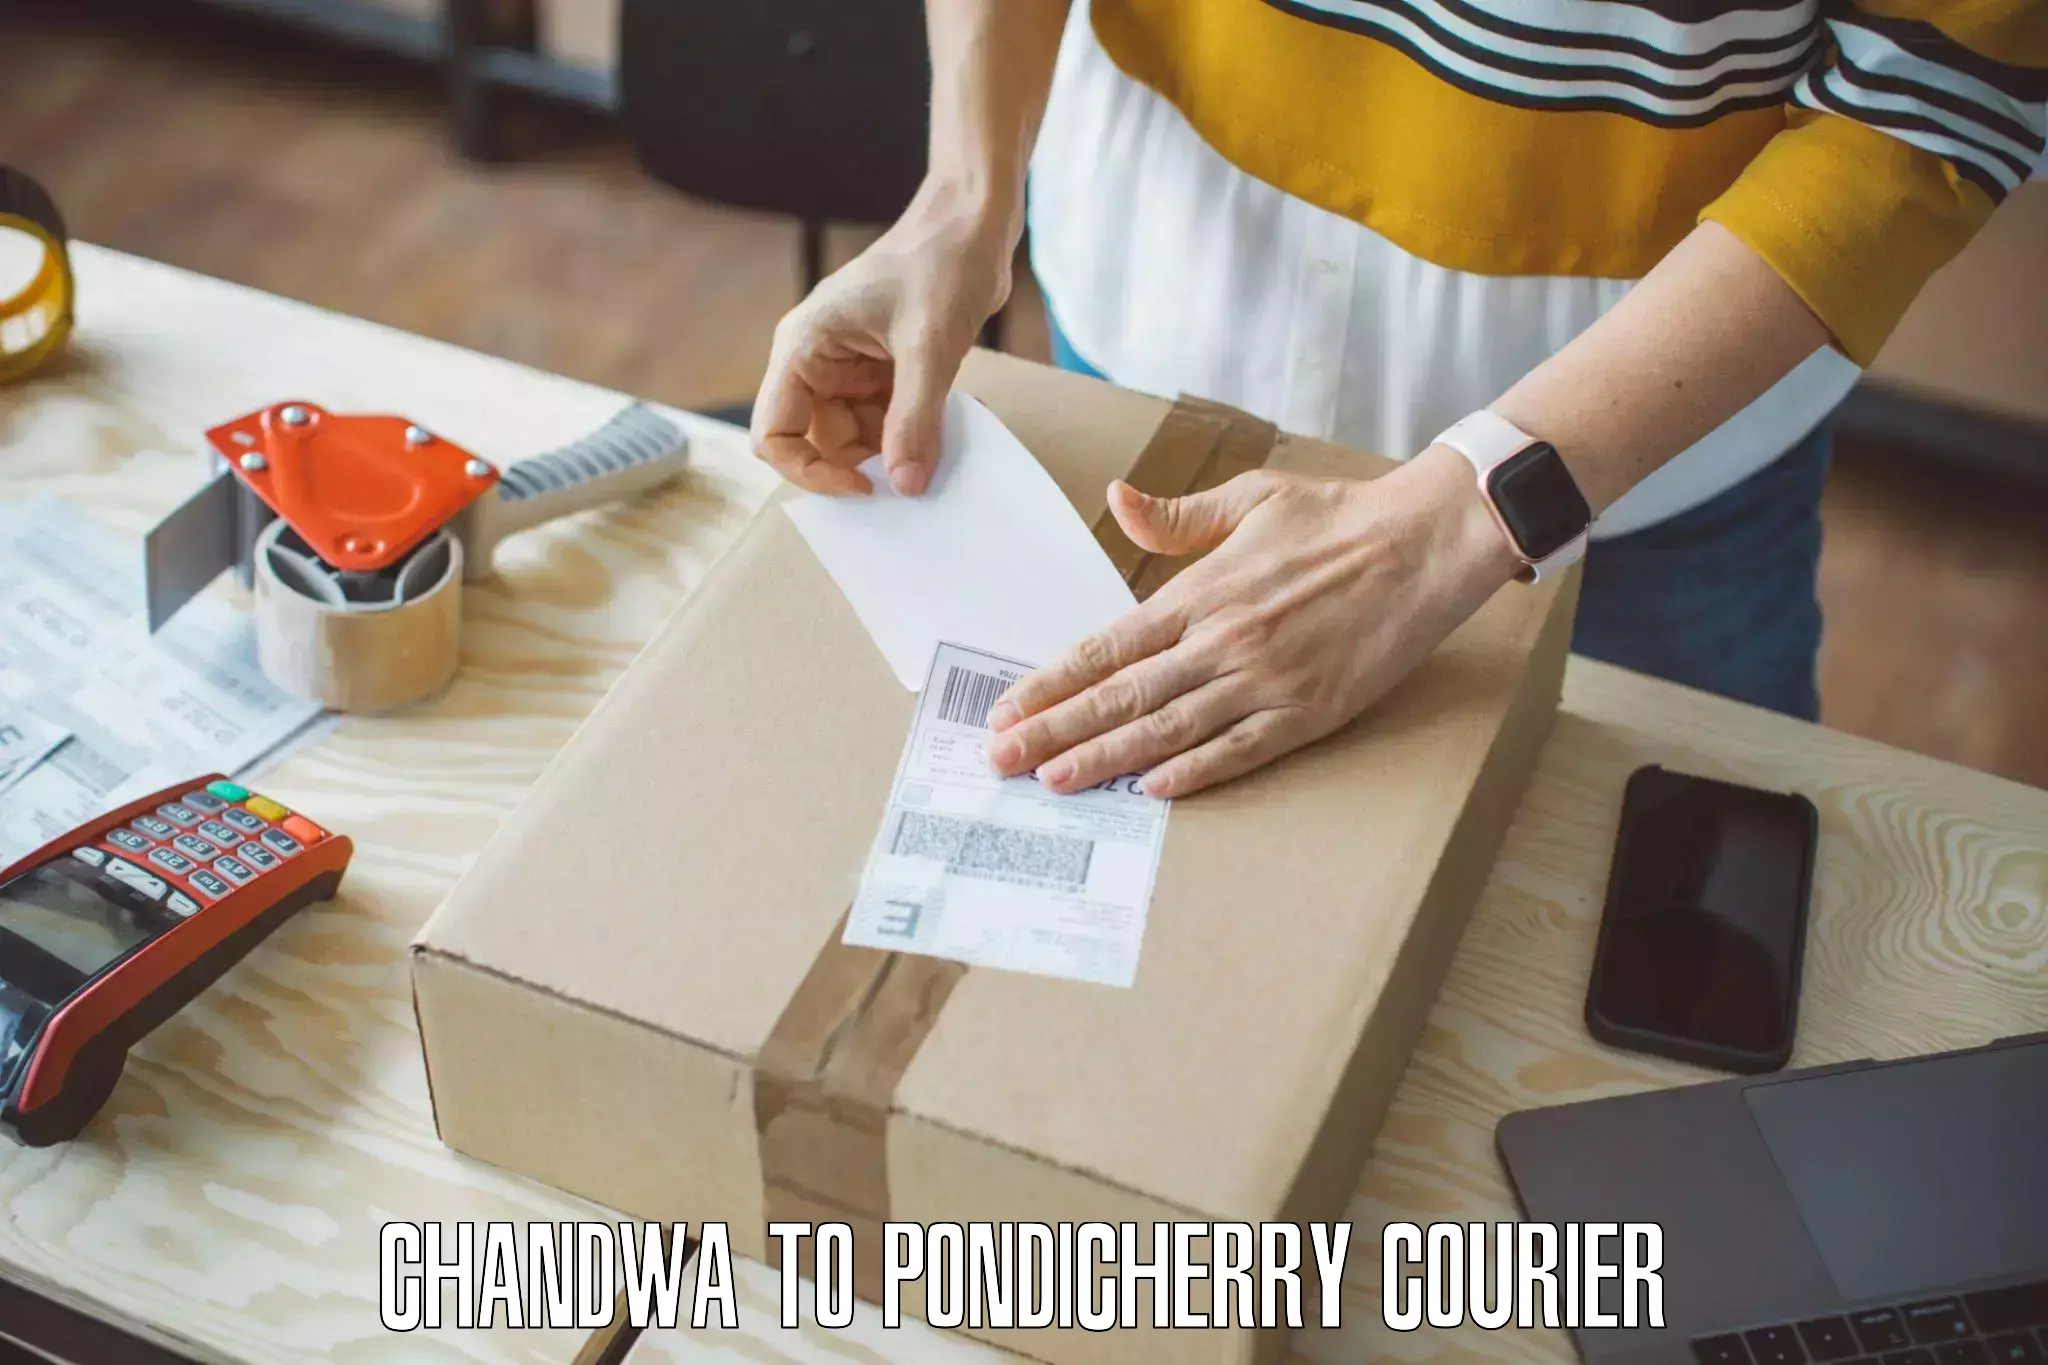 Affordable relocation services Chandwa to Pondicherry